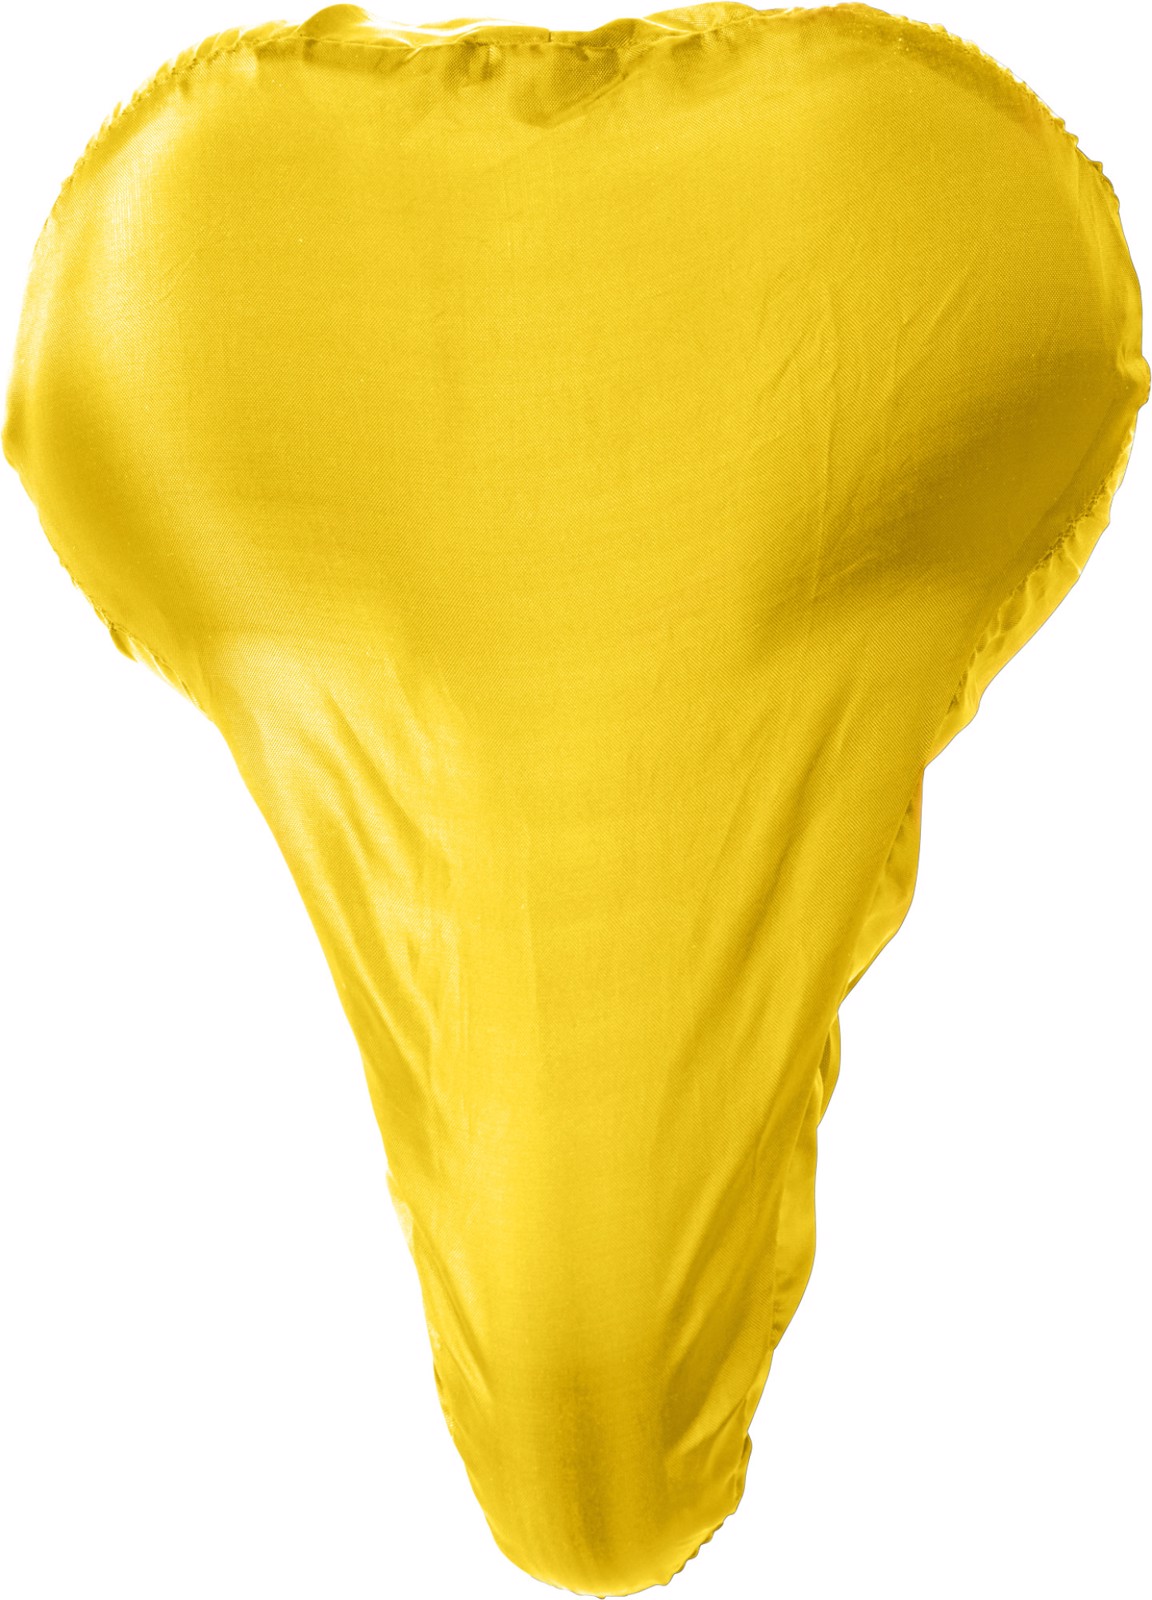 Polyester (190T) bicycle seat cover - Yellow